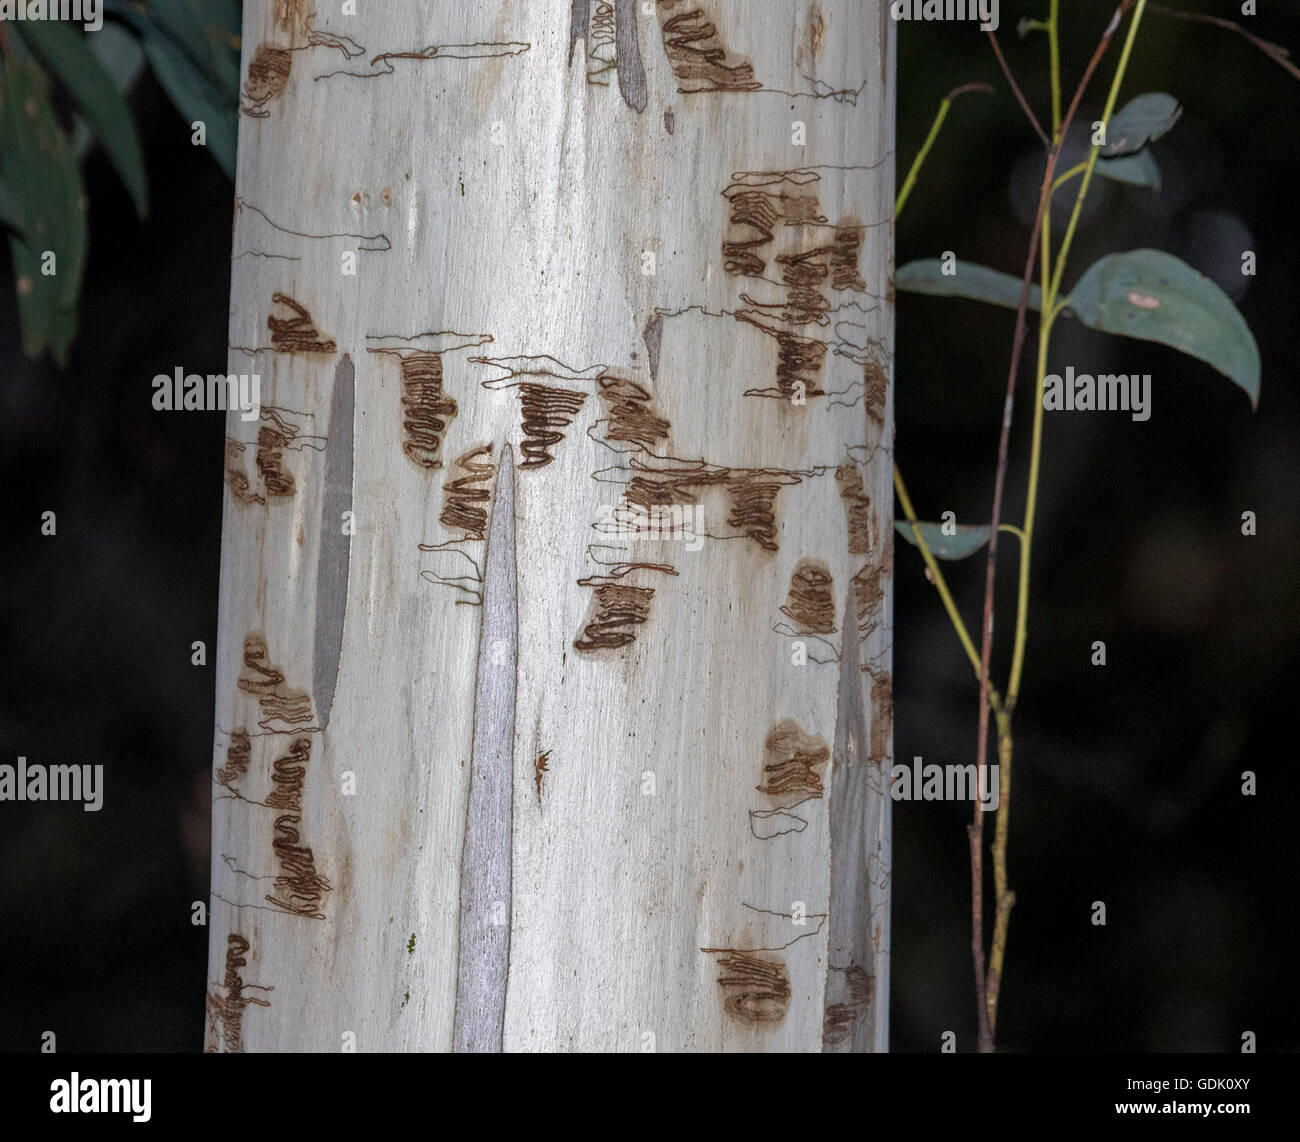 Scribbly Gum Tree High Resolution Stock Photography and Images - Alamy